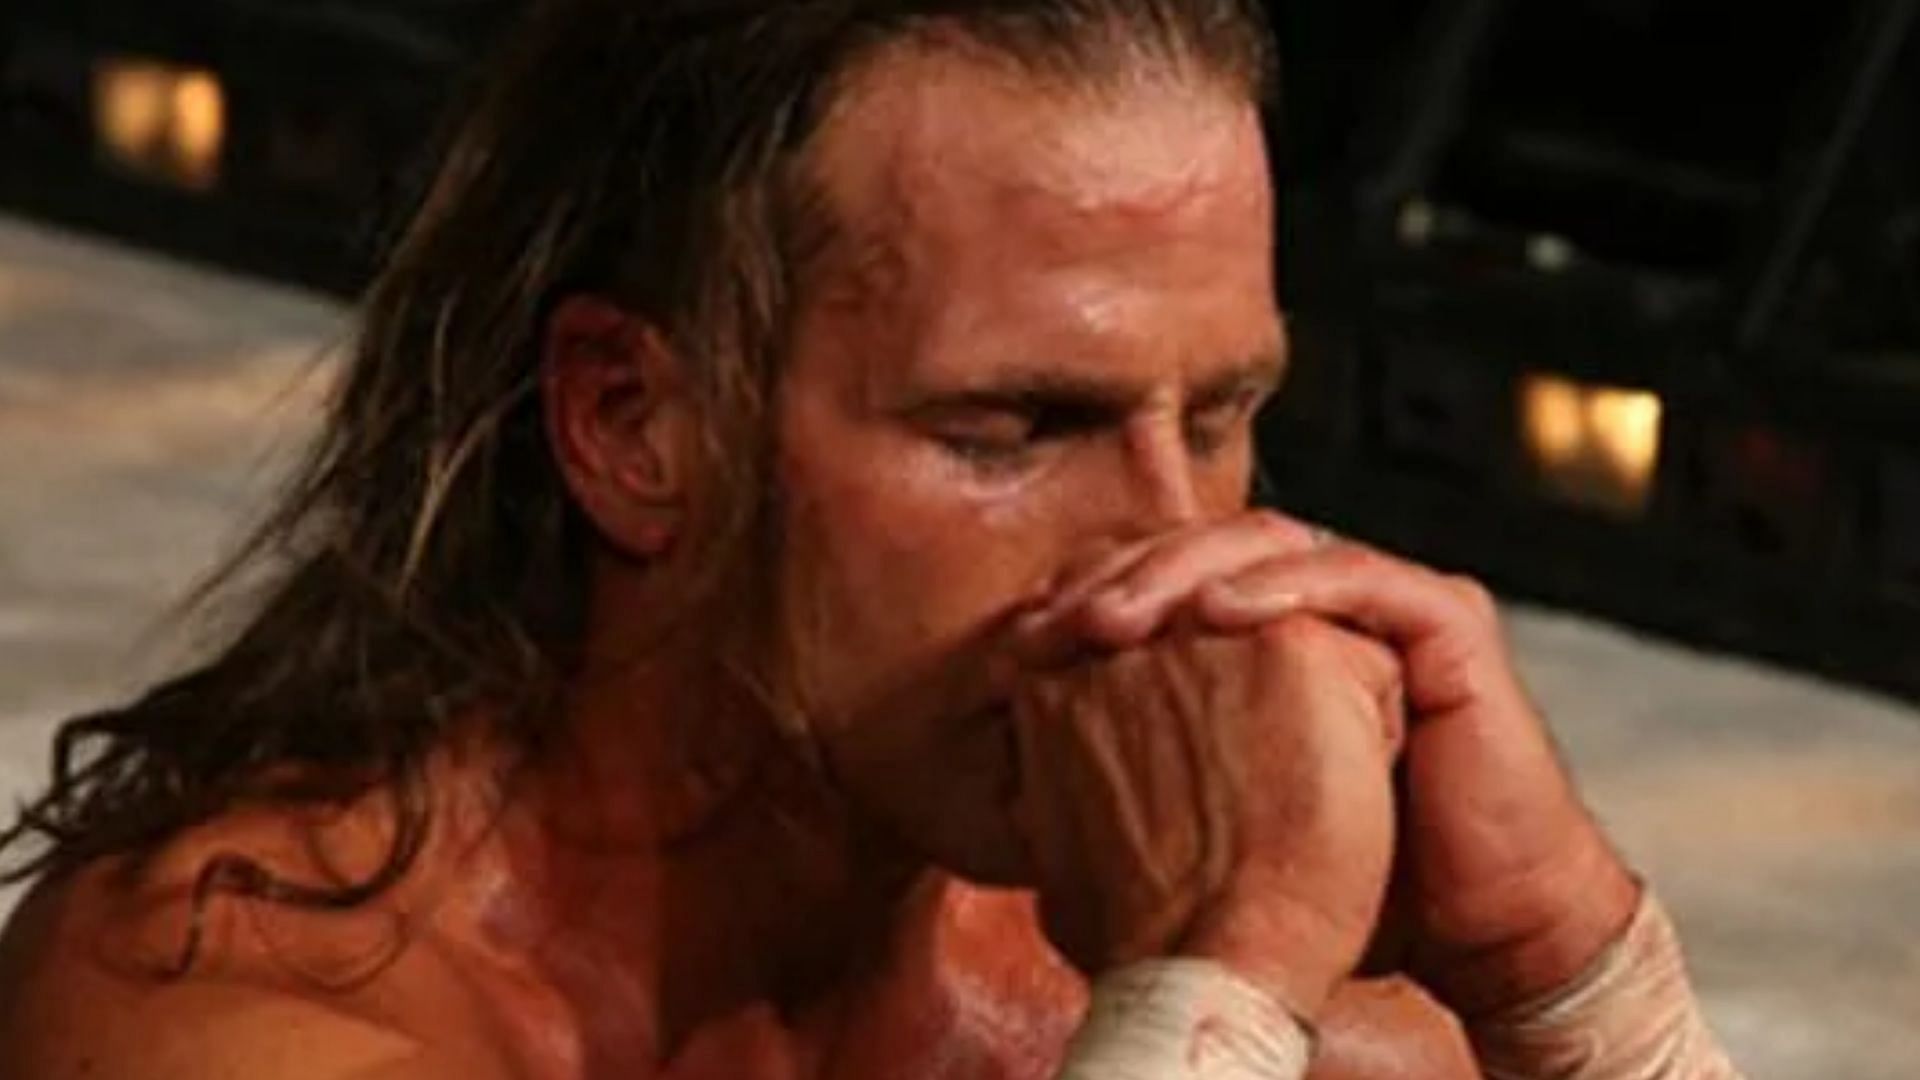 Shawn Michaels might have a dilemma on his hands